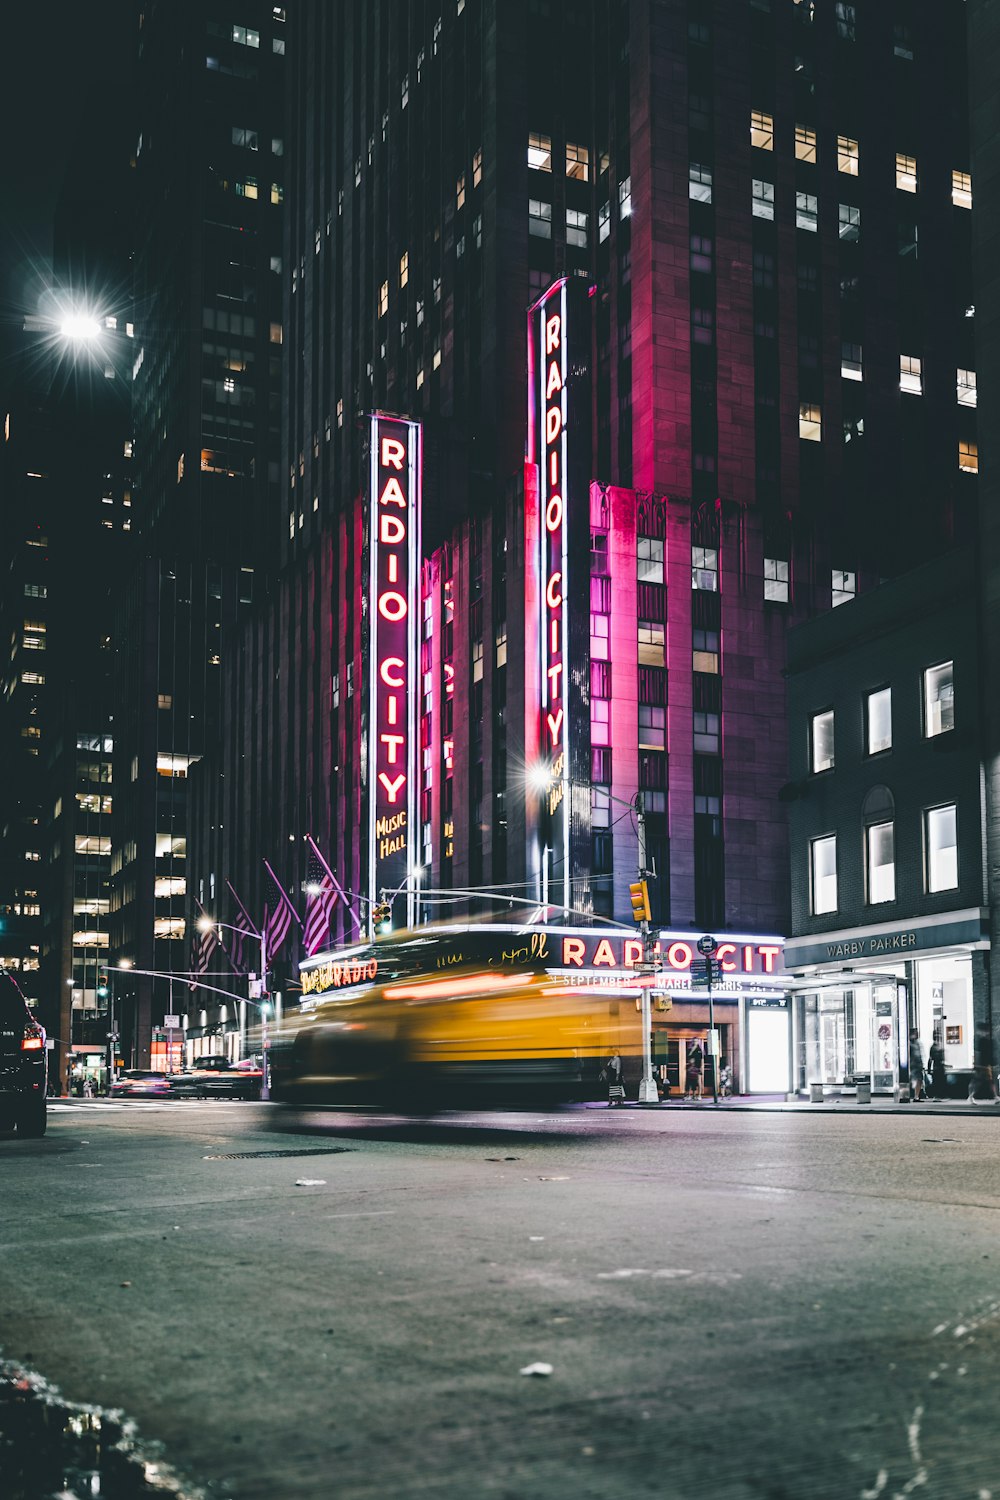 radio city buildings in time lapse photography